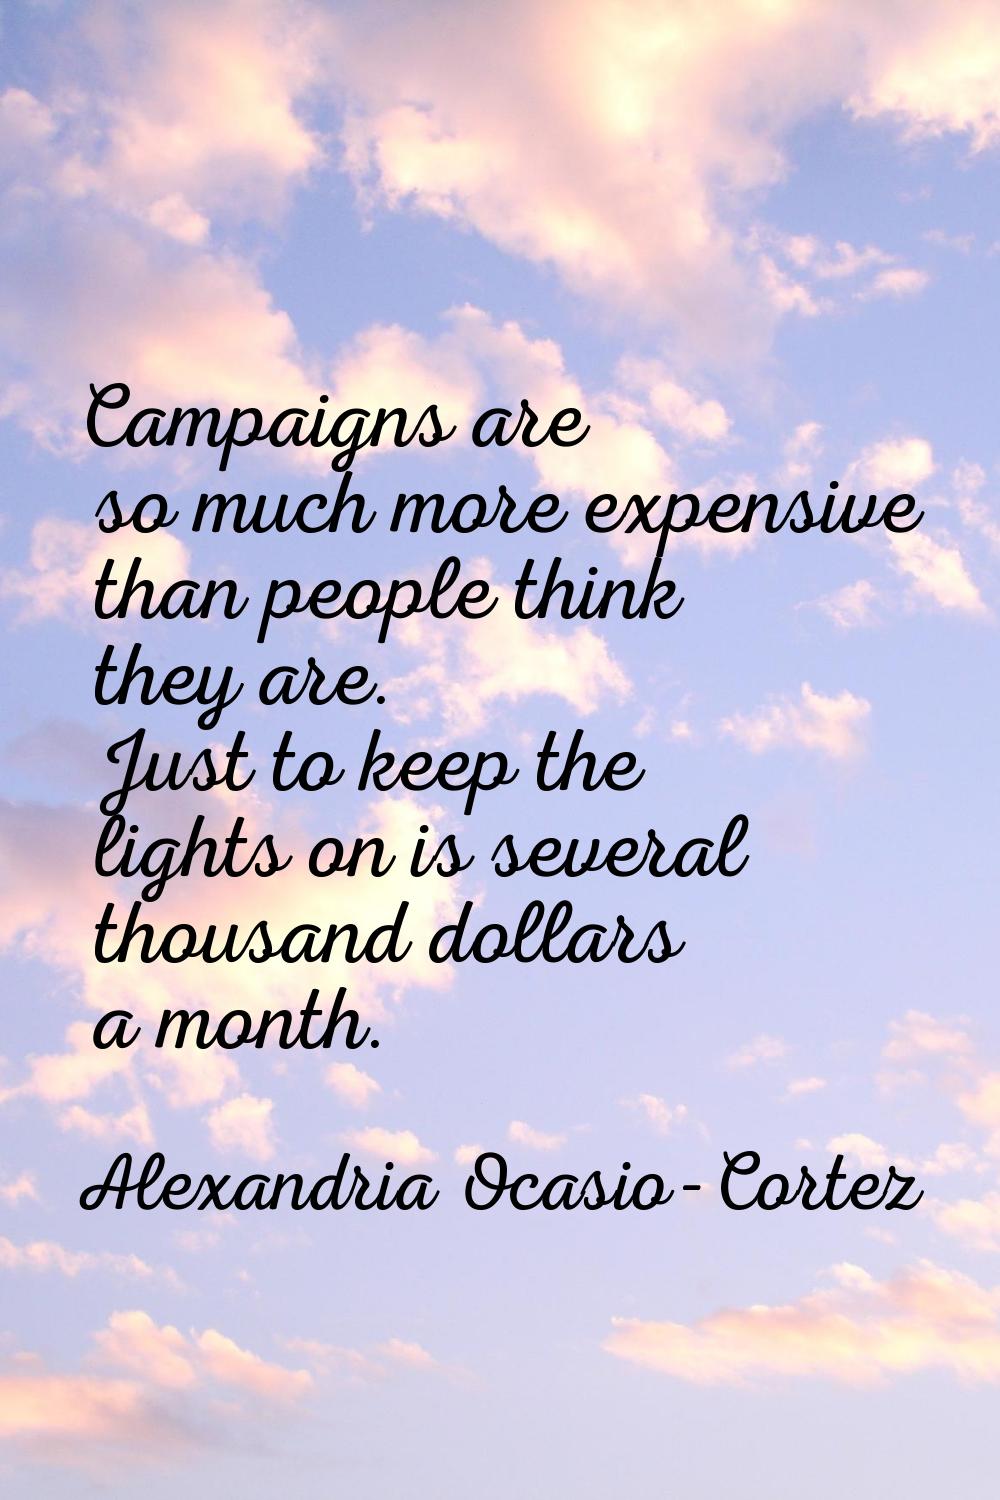 Campaigns are so much more expensive than people think they are. Just to keep the lights on is seve